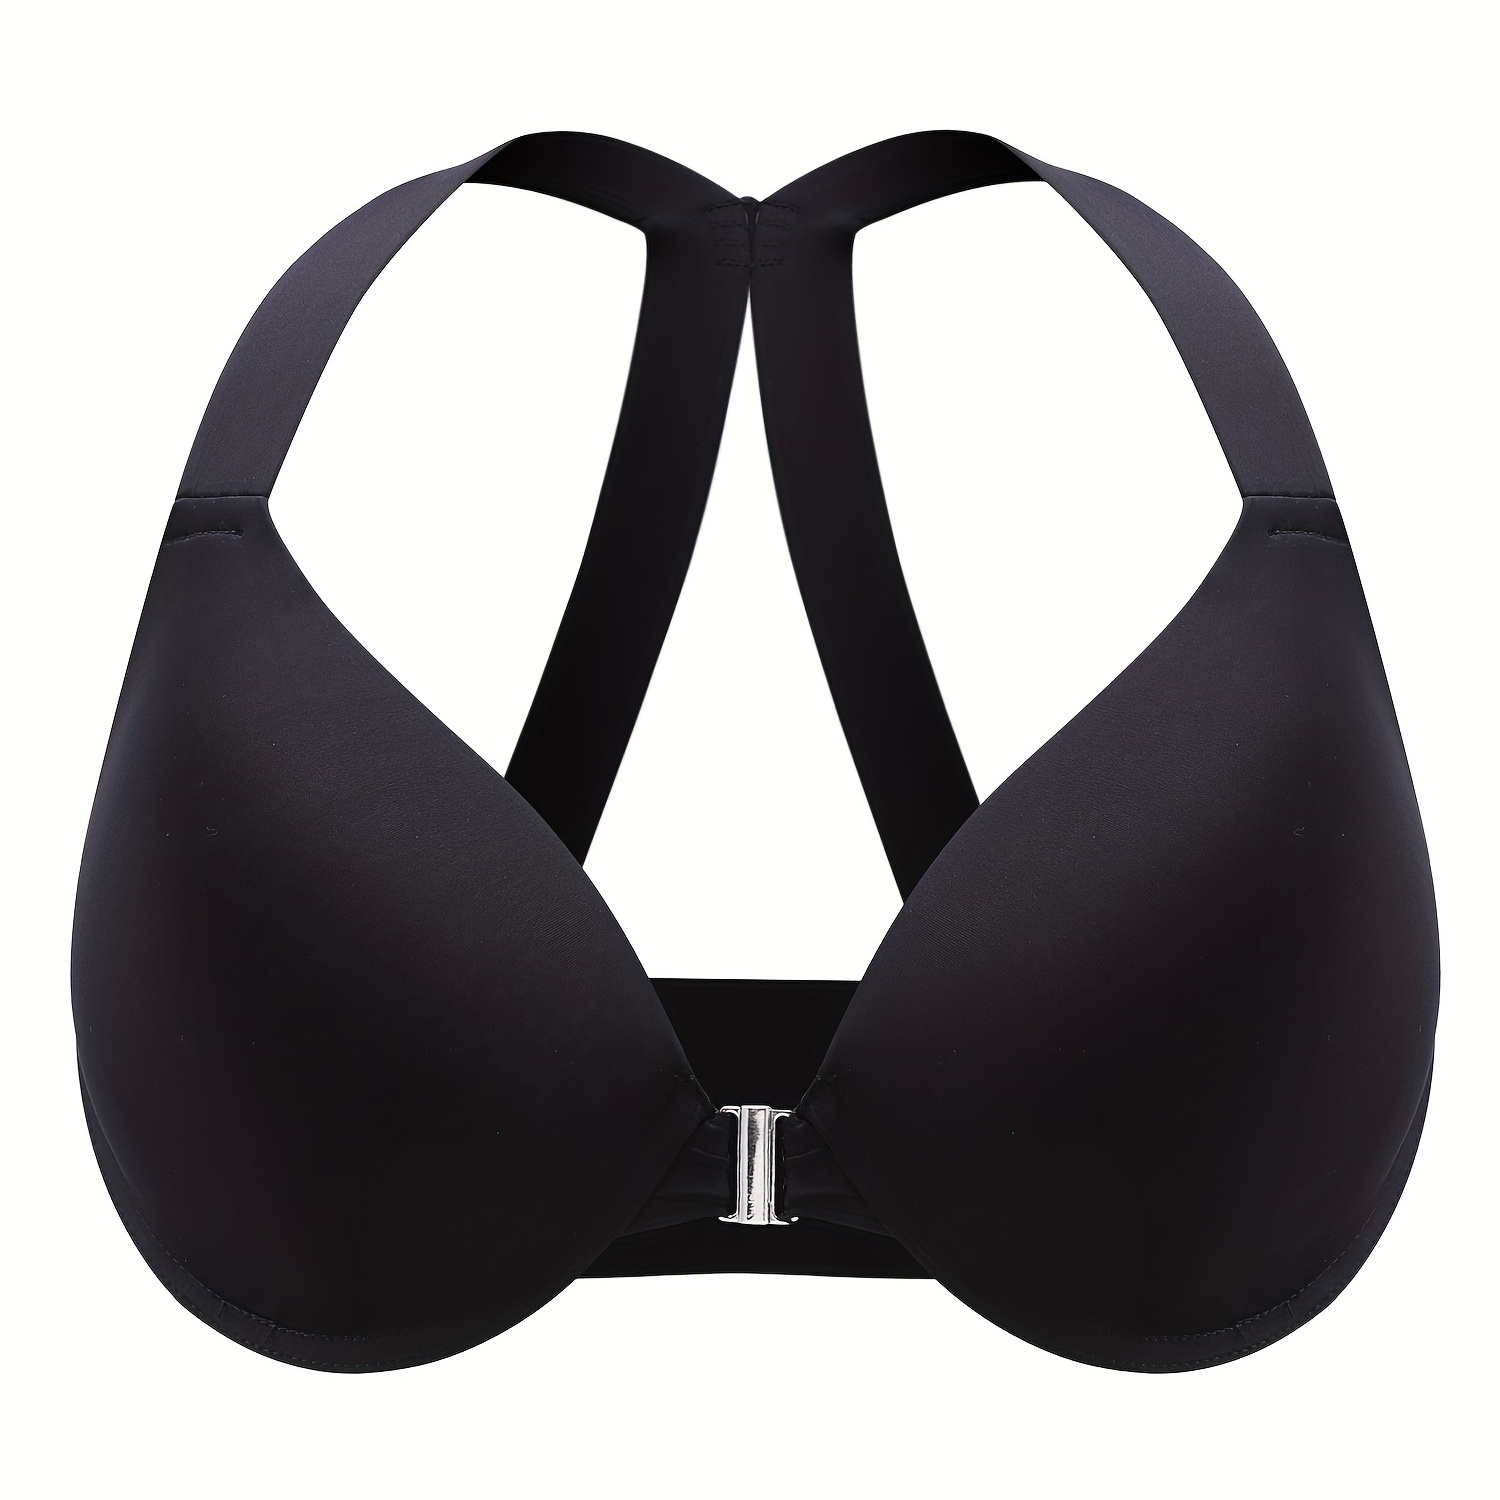 Buy OneTwoTG Women's Sexy Cotton Full Figure Everyday Bra Soft